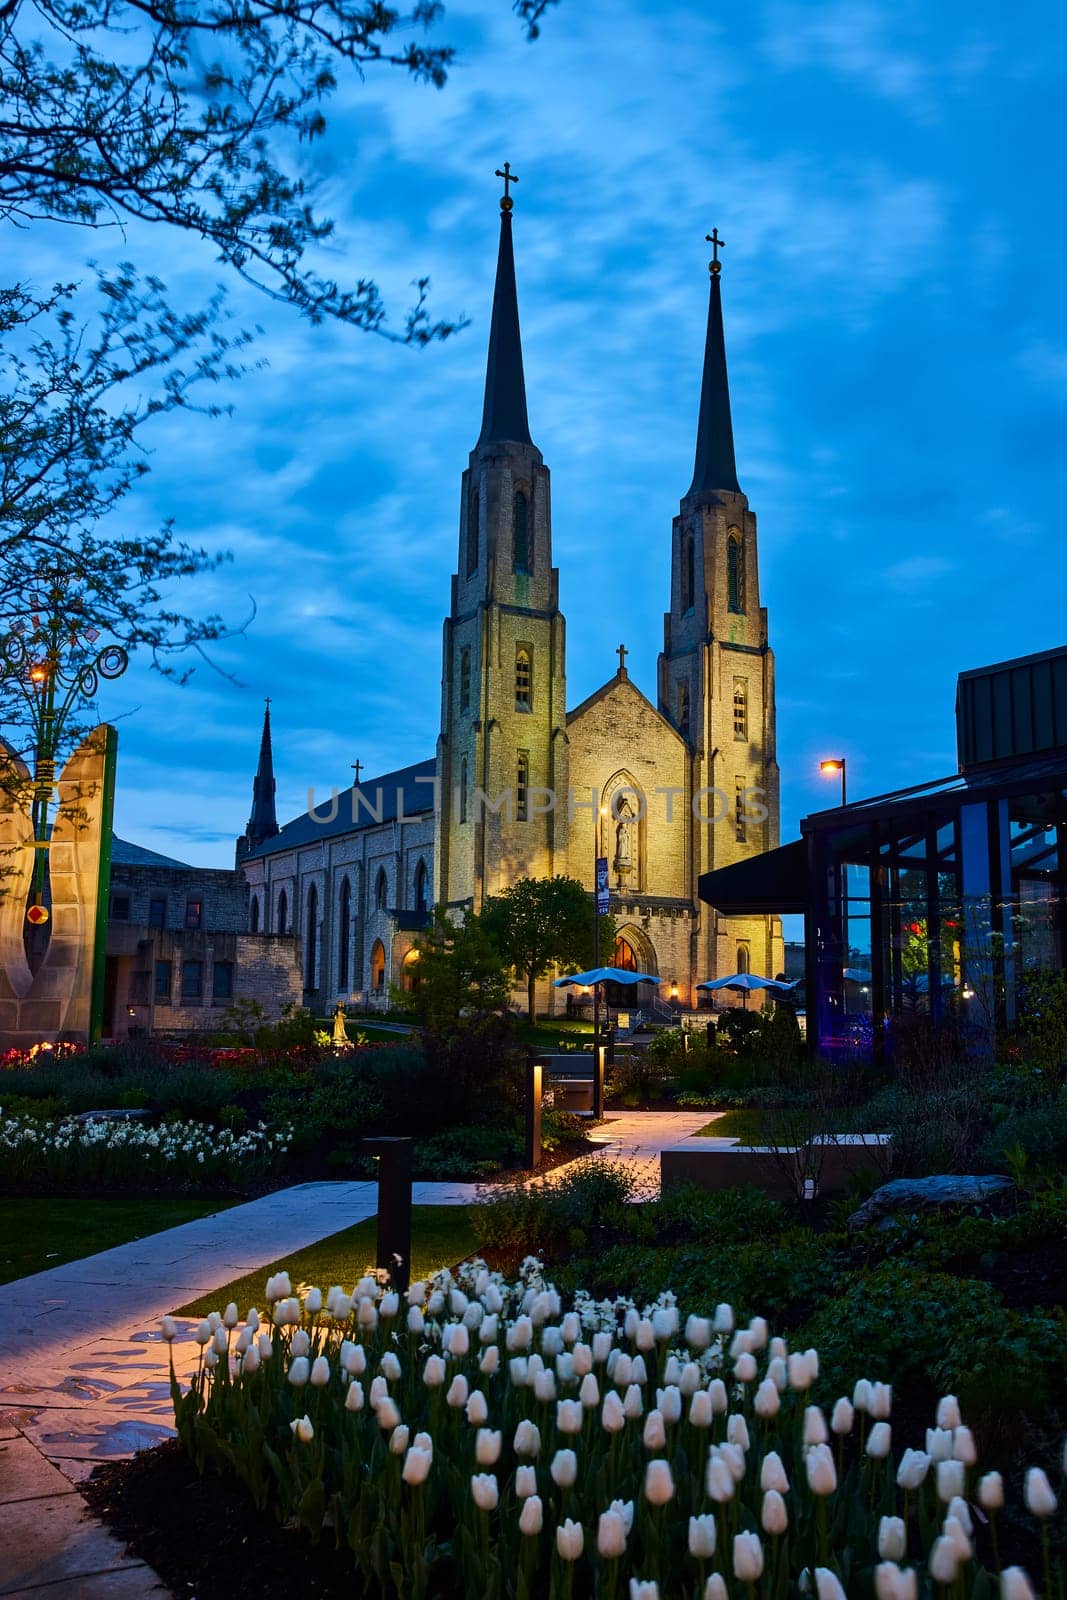 Twilight embraces a historic church with twin spires in Fort Wayne, set against a garden of white tulips.